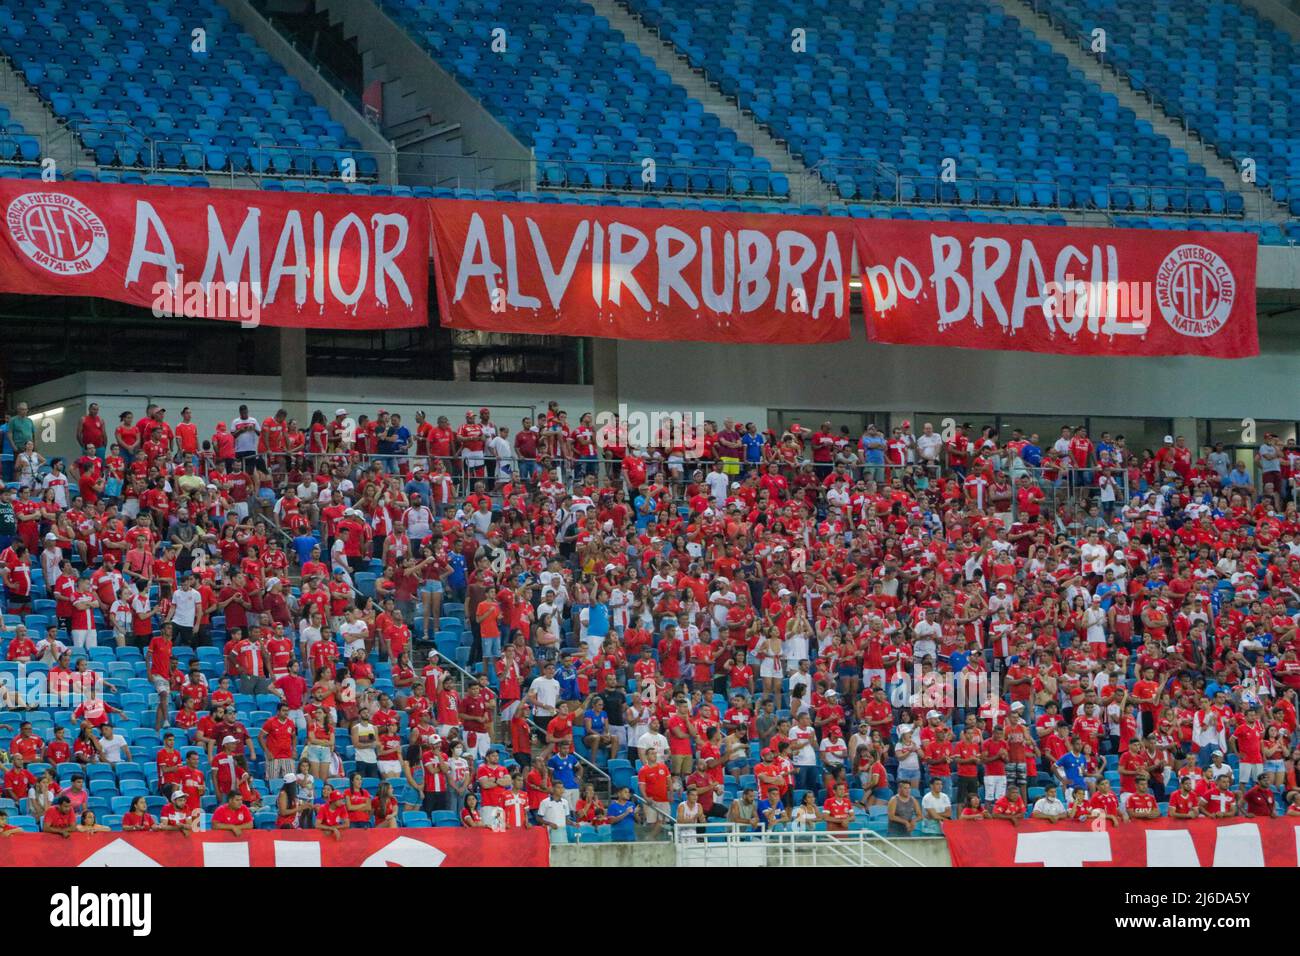 RN - Natal - 04/30/2022 - BRAZILIAN SERIE D 2022, AMERICA X AFOGADOS - America-RN fans during a match against Afogados at the Arena das Dunas stadium for the Brazilian championship D 2022. Photo: Augusto Ratis/AGIF/Sipa USA Stock Photo